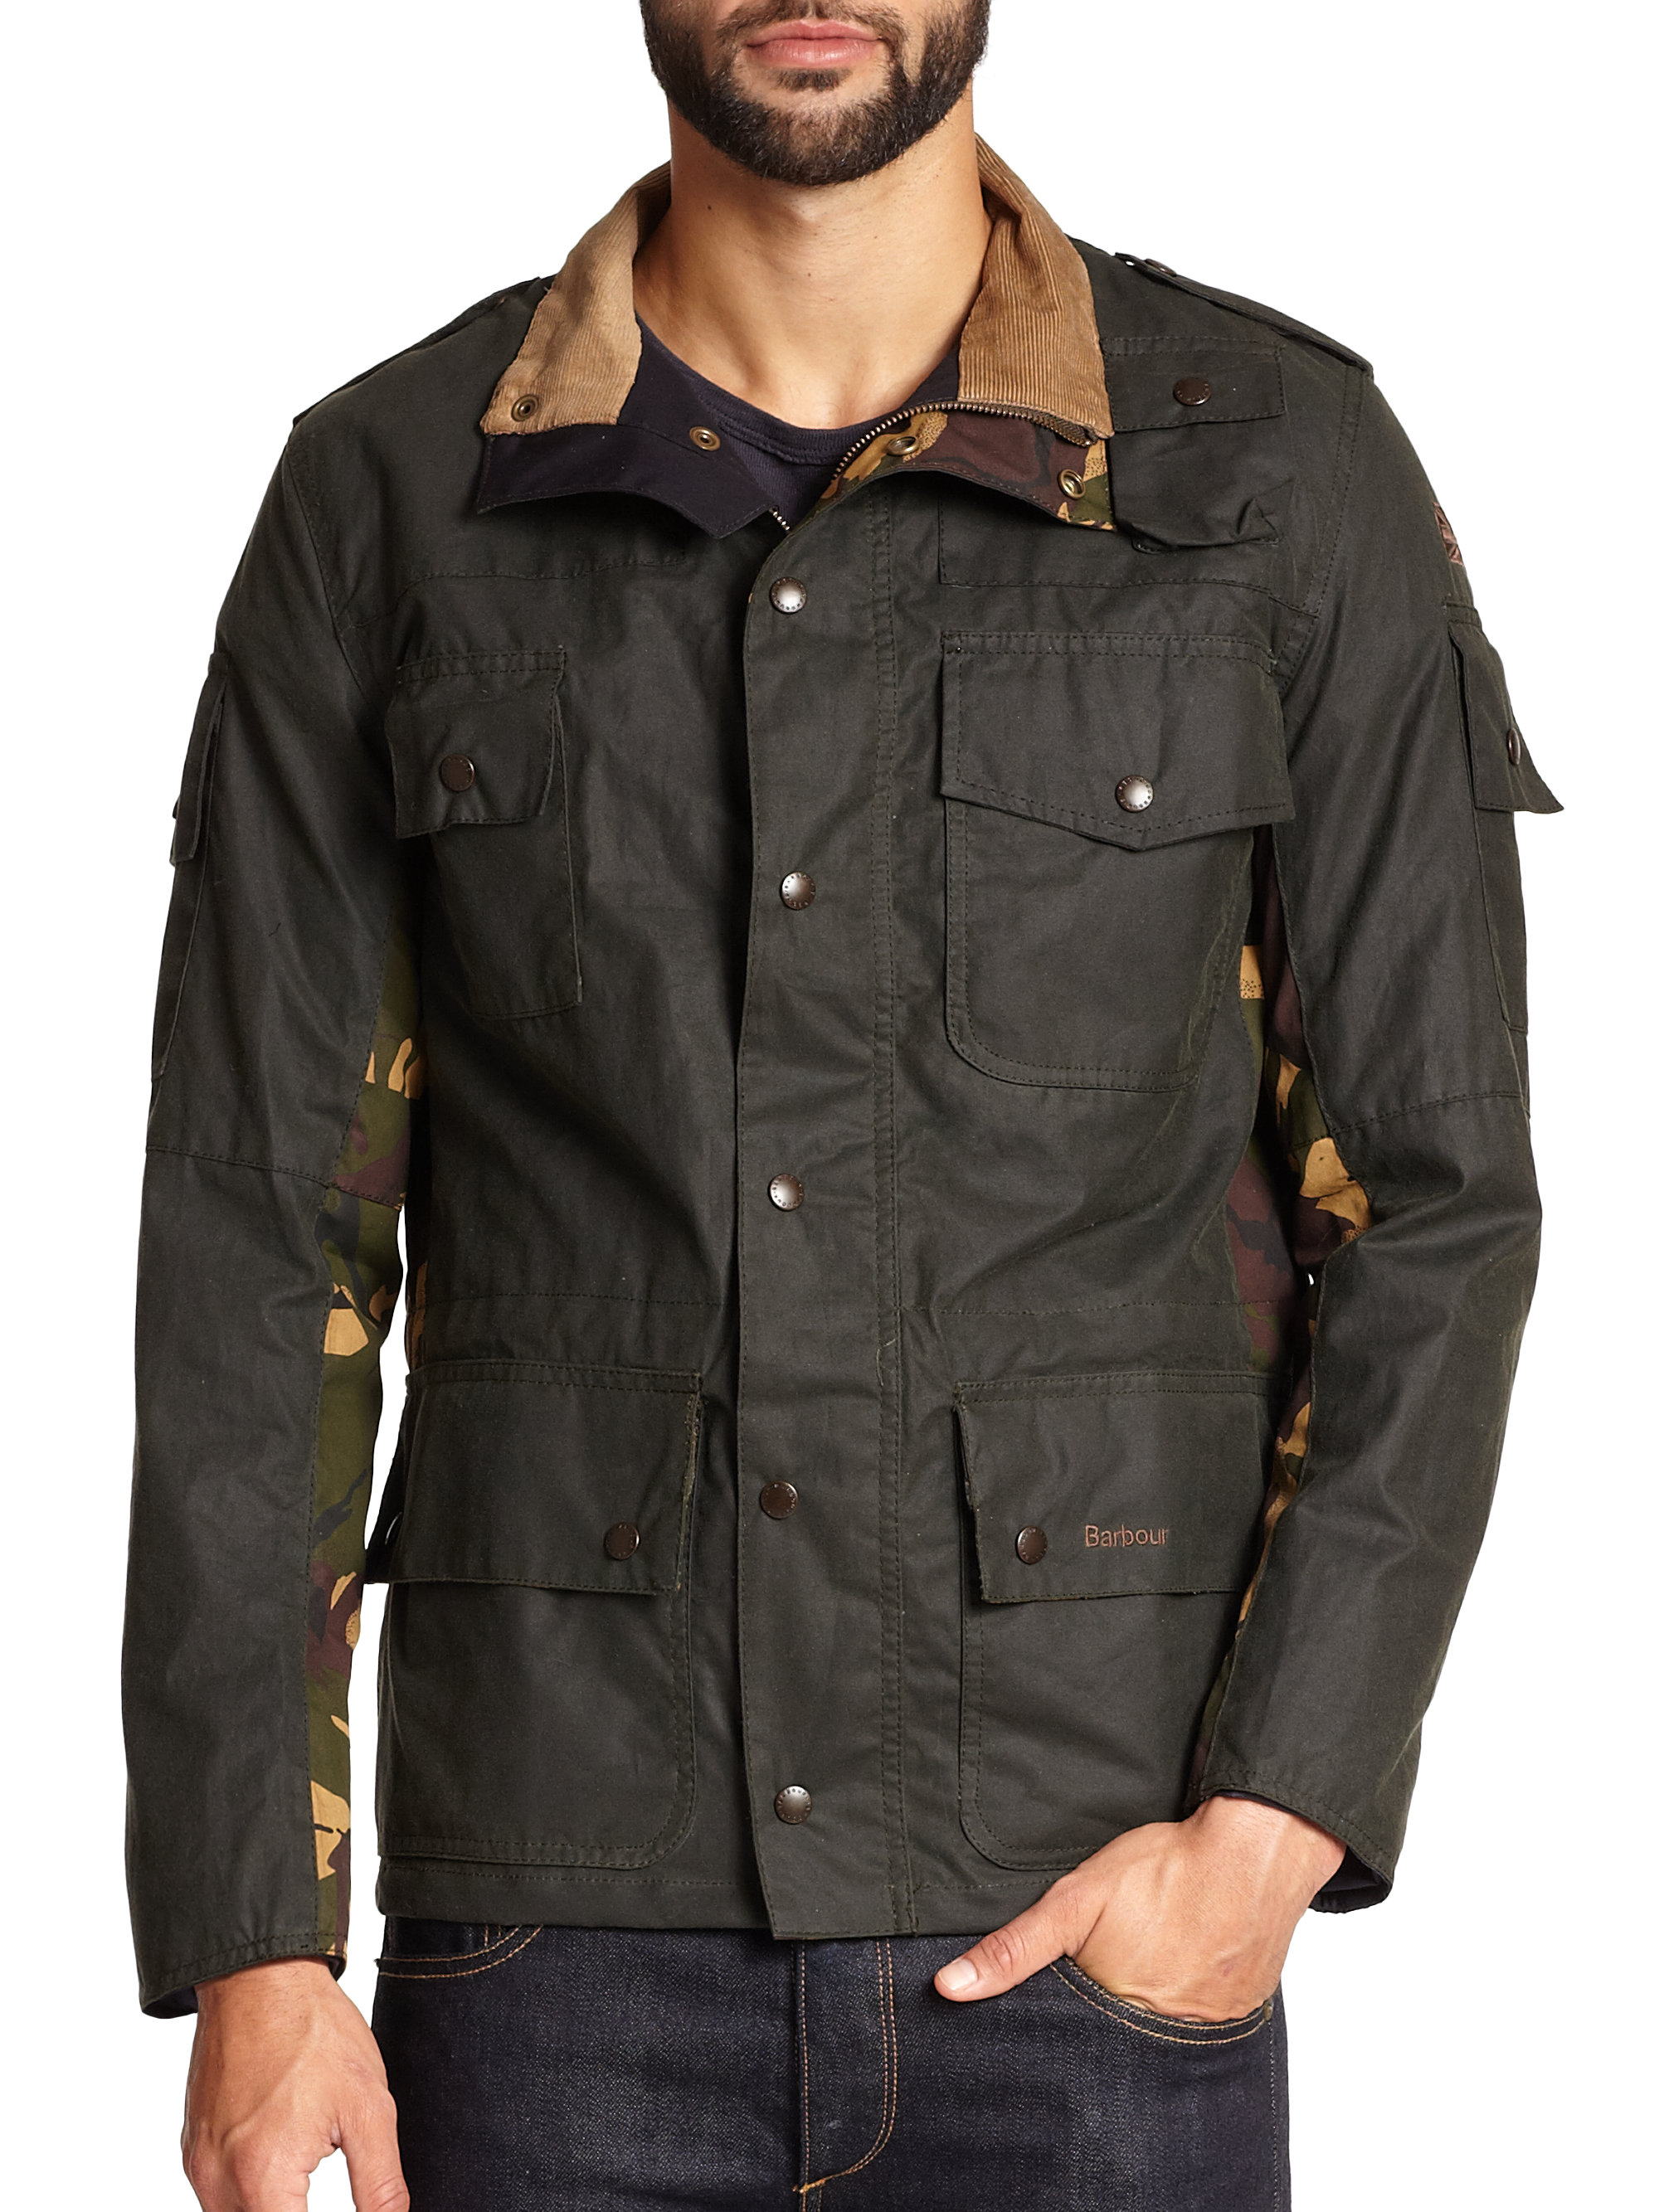 Barbour Cowen Commando Waxed Cotton Jacket in Sage (Green) for Men - Lyst